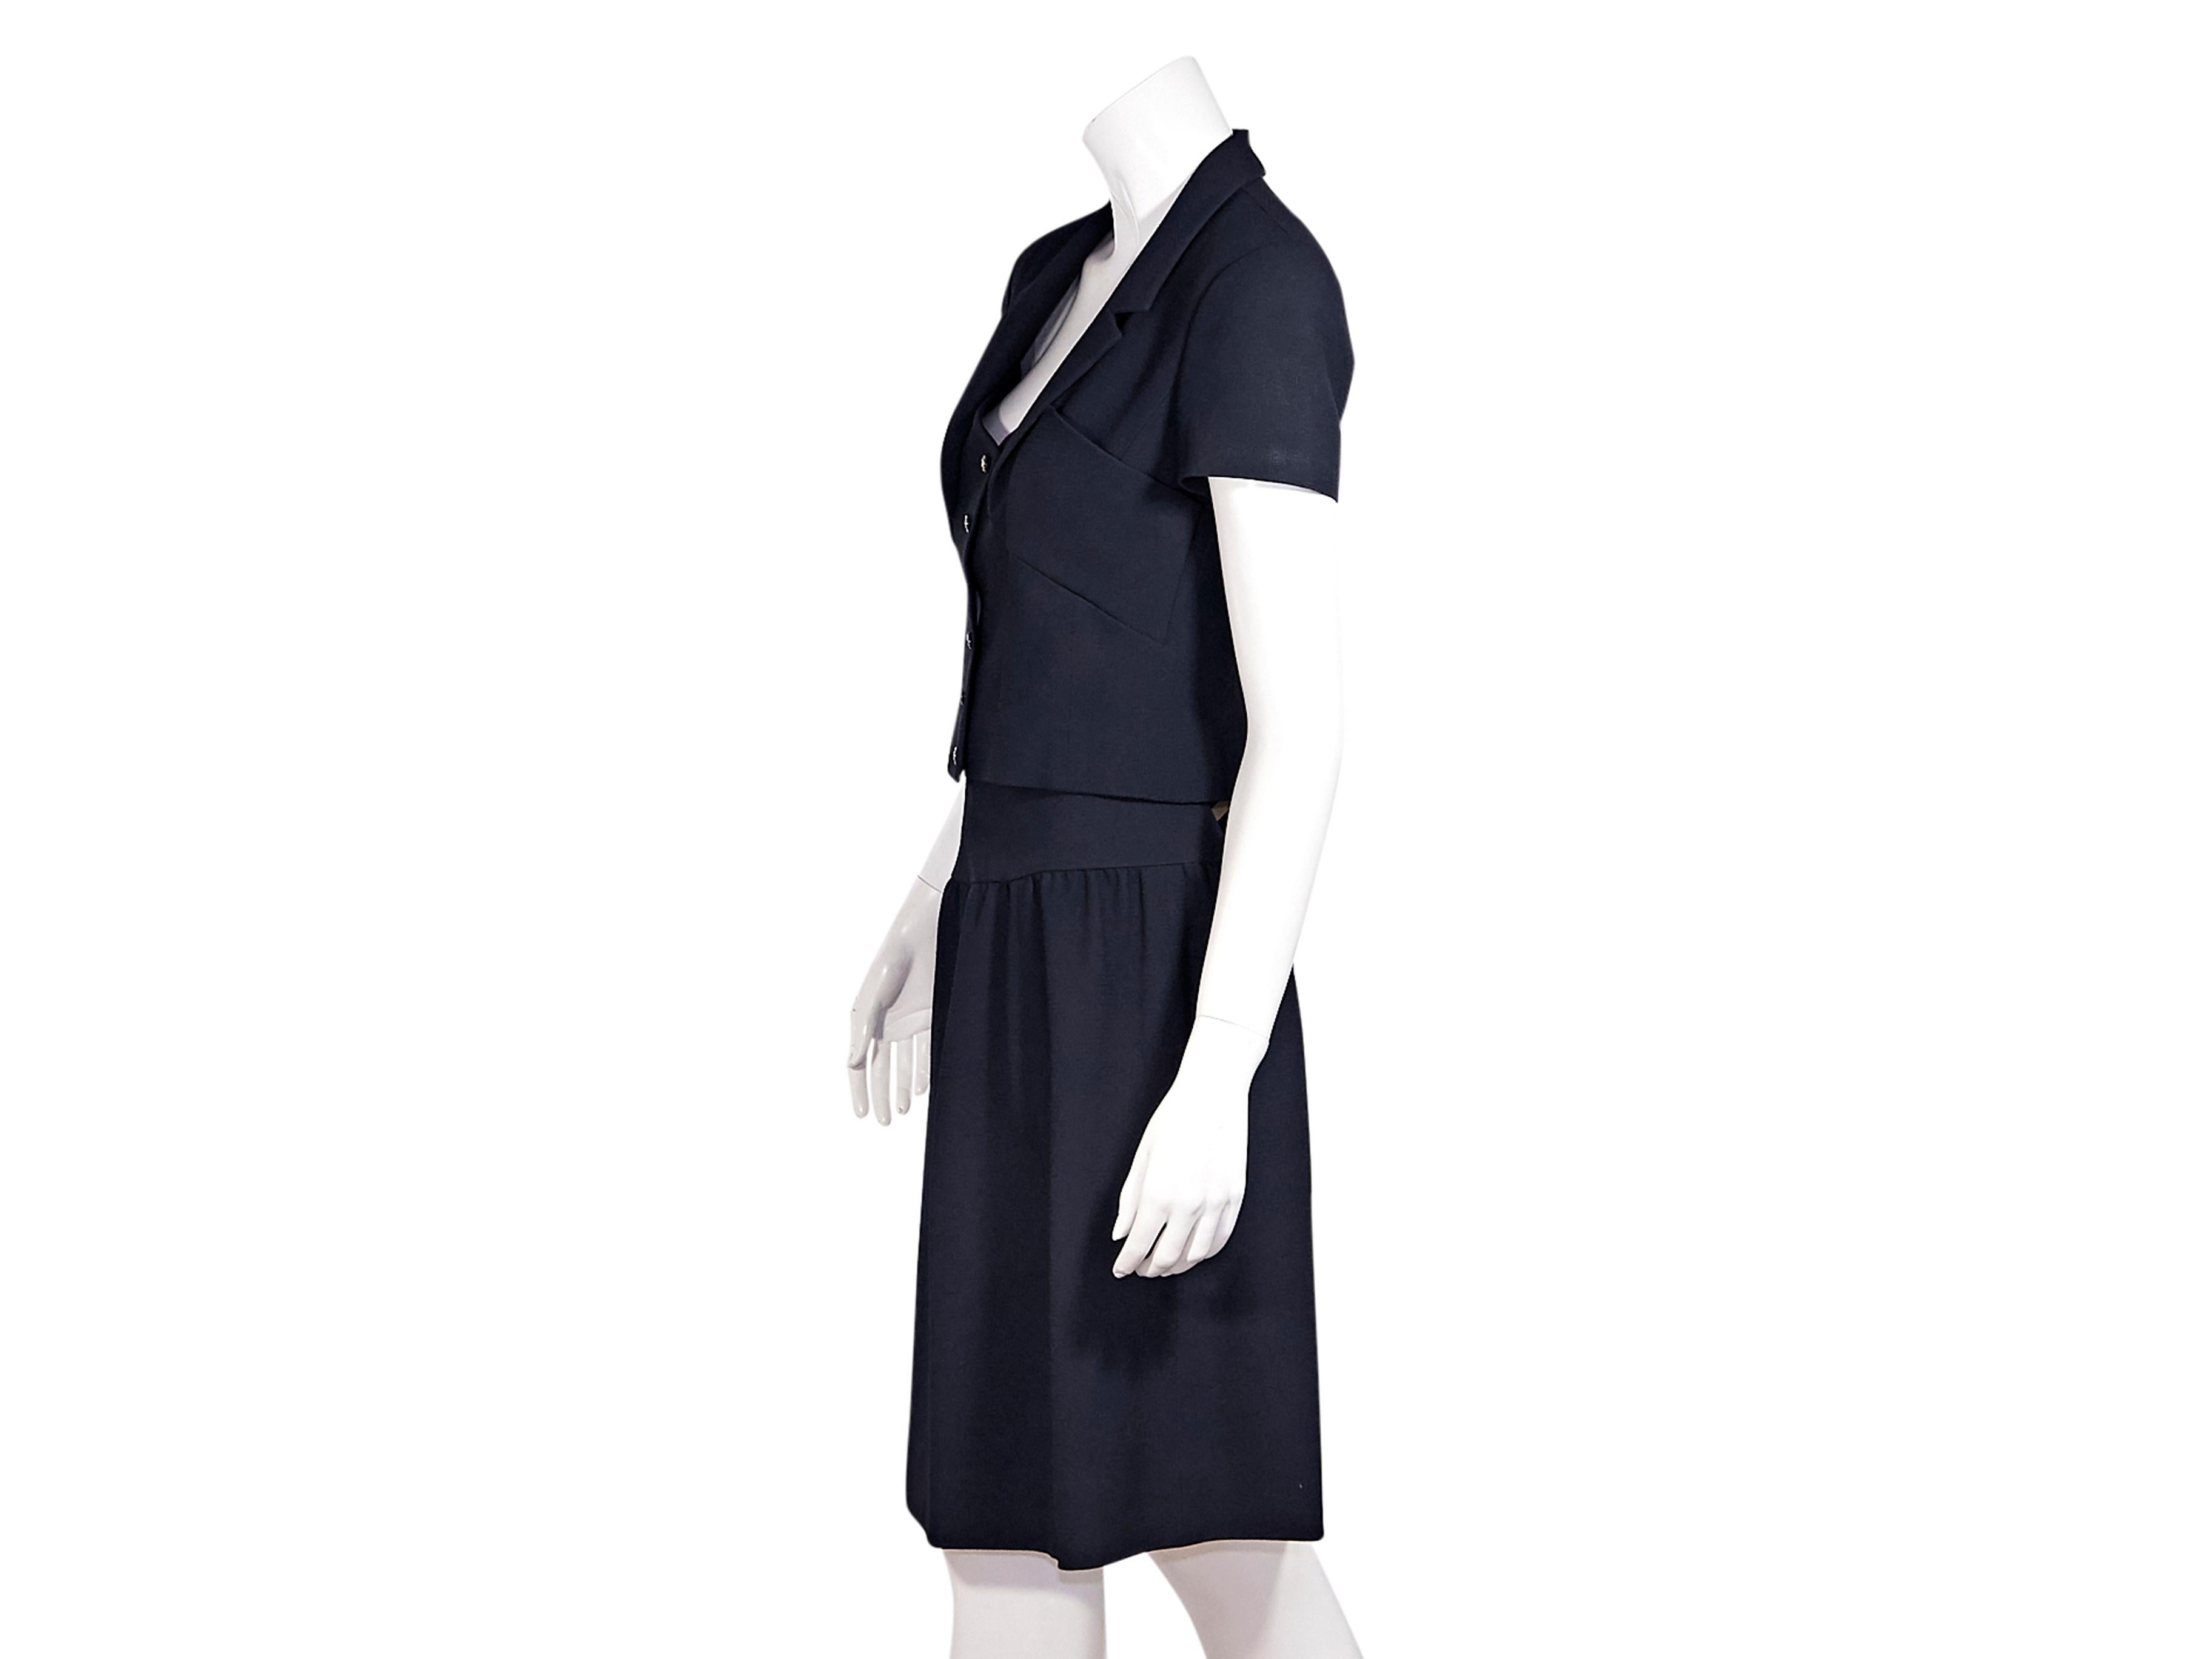 Product details:  Navy blue skirt suit set by Chanel.  From 1995.  Cropped jacket.  Notched lapel.  Short sleeves.  Button-front closure.  Seams create a fitted silhouette.  Matching skirt.  Banded waist.  Concealed zip closure.  Jacket:  30